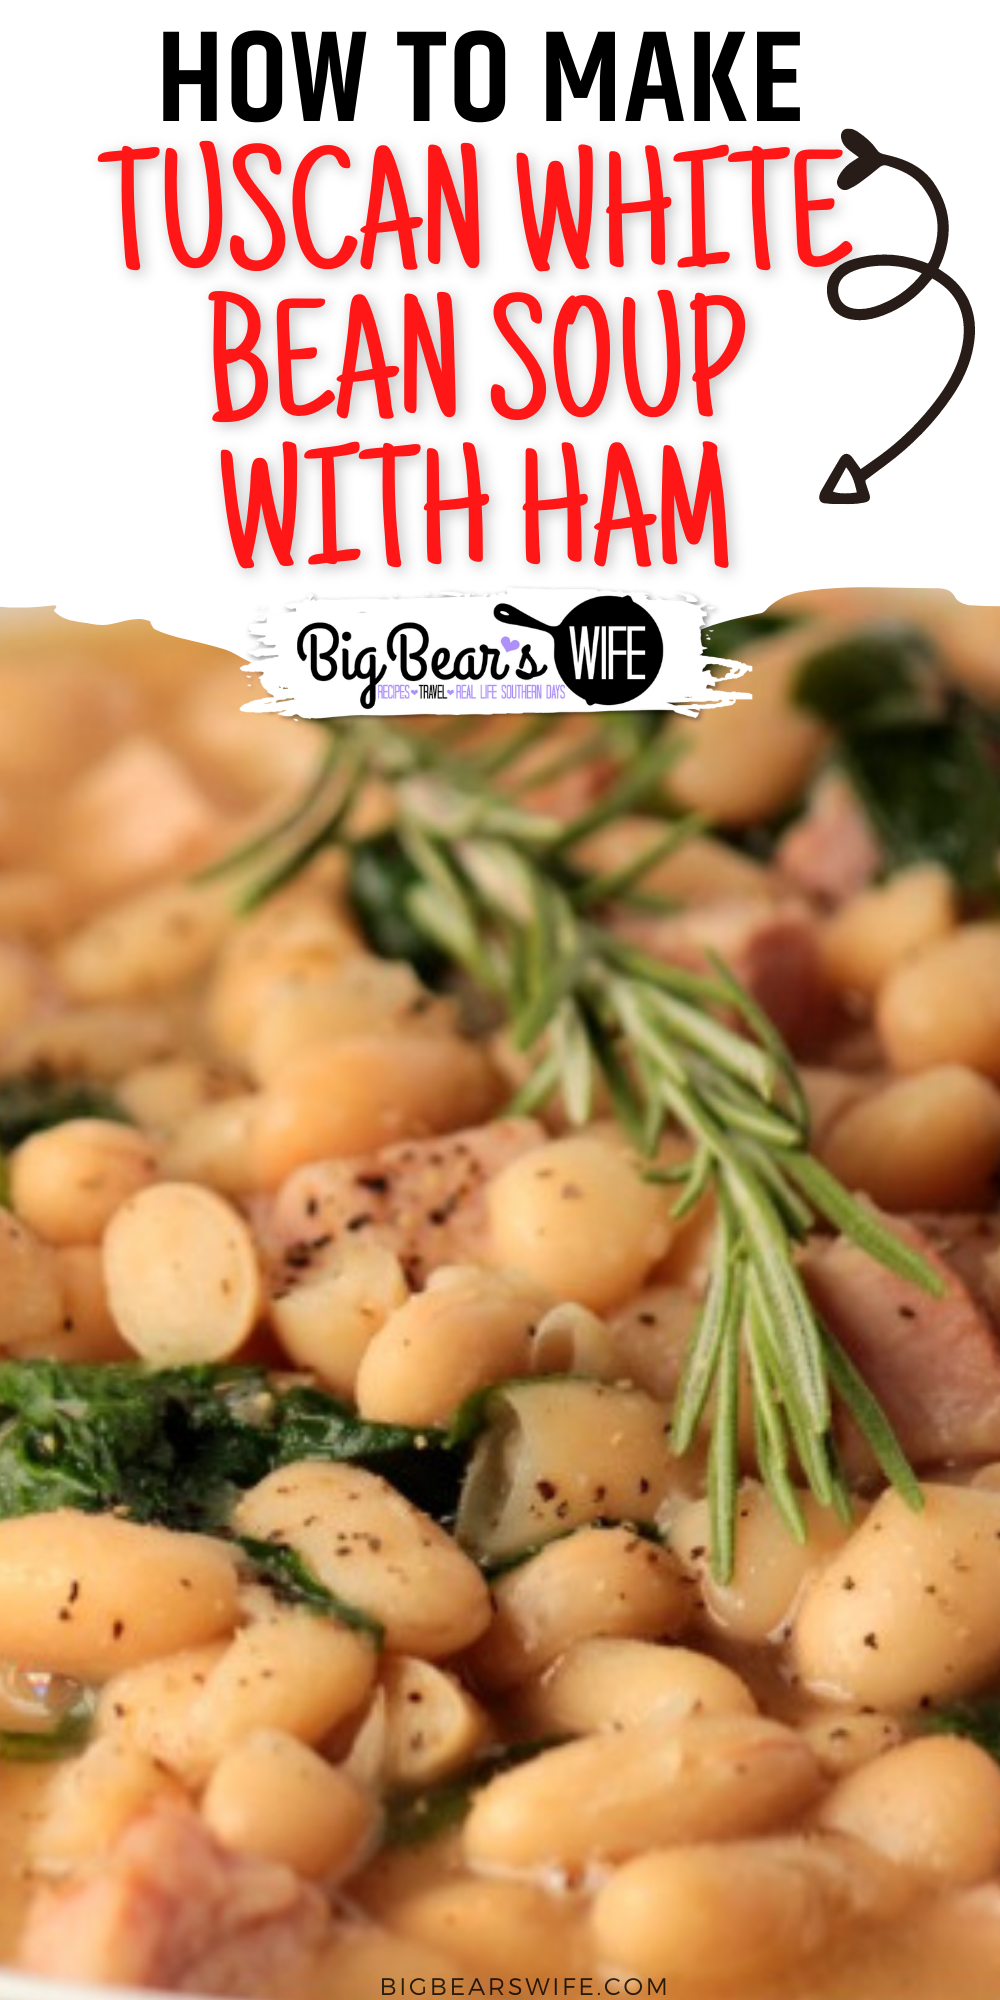 This Tuscan White Bean Soup with Ham is packed full of  Cannellini white beans and ham! It's an easy soup that's ready in under 45 minutes. This would be great with leftover ham from Thanksgiving or leftover turkey!  via @bigbearswife